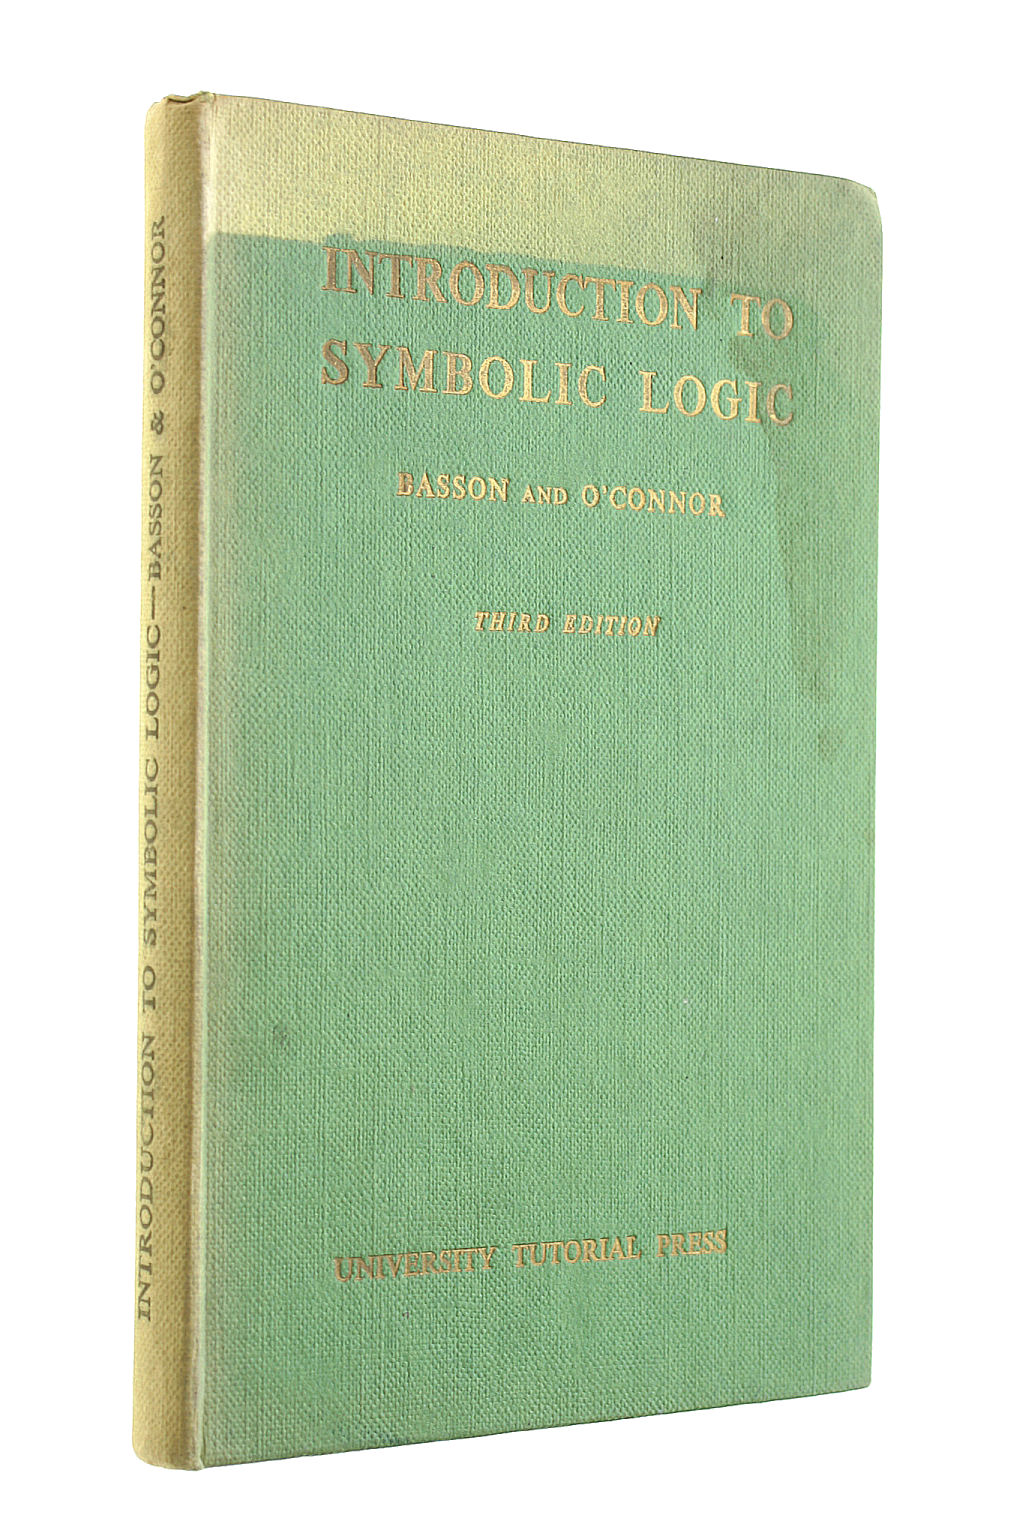 BASSON, A. H. & D. J. O'CONNOR. - Introduction To Symbolic Logic.